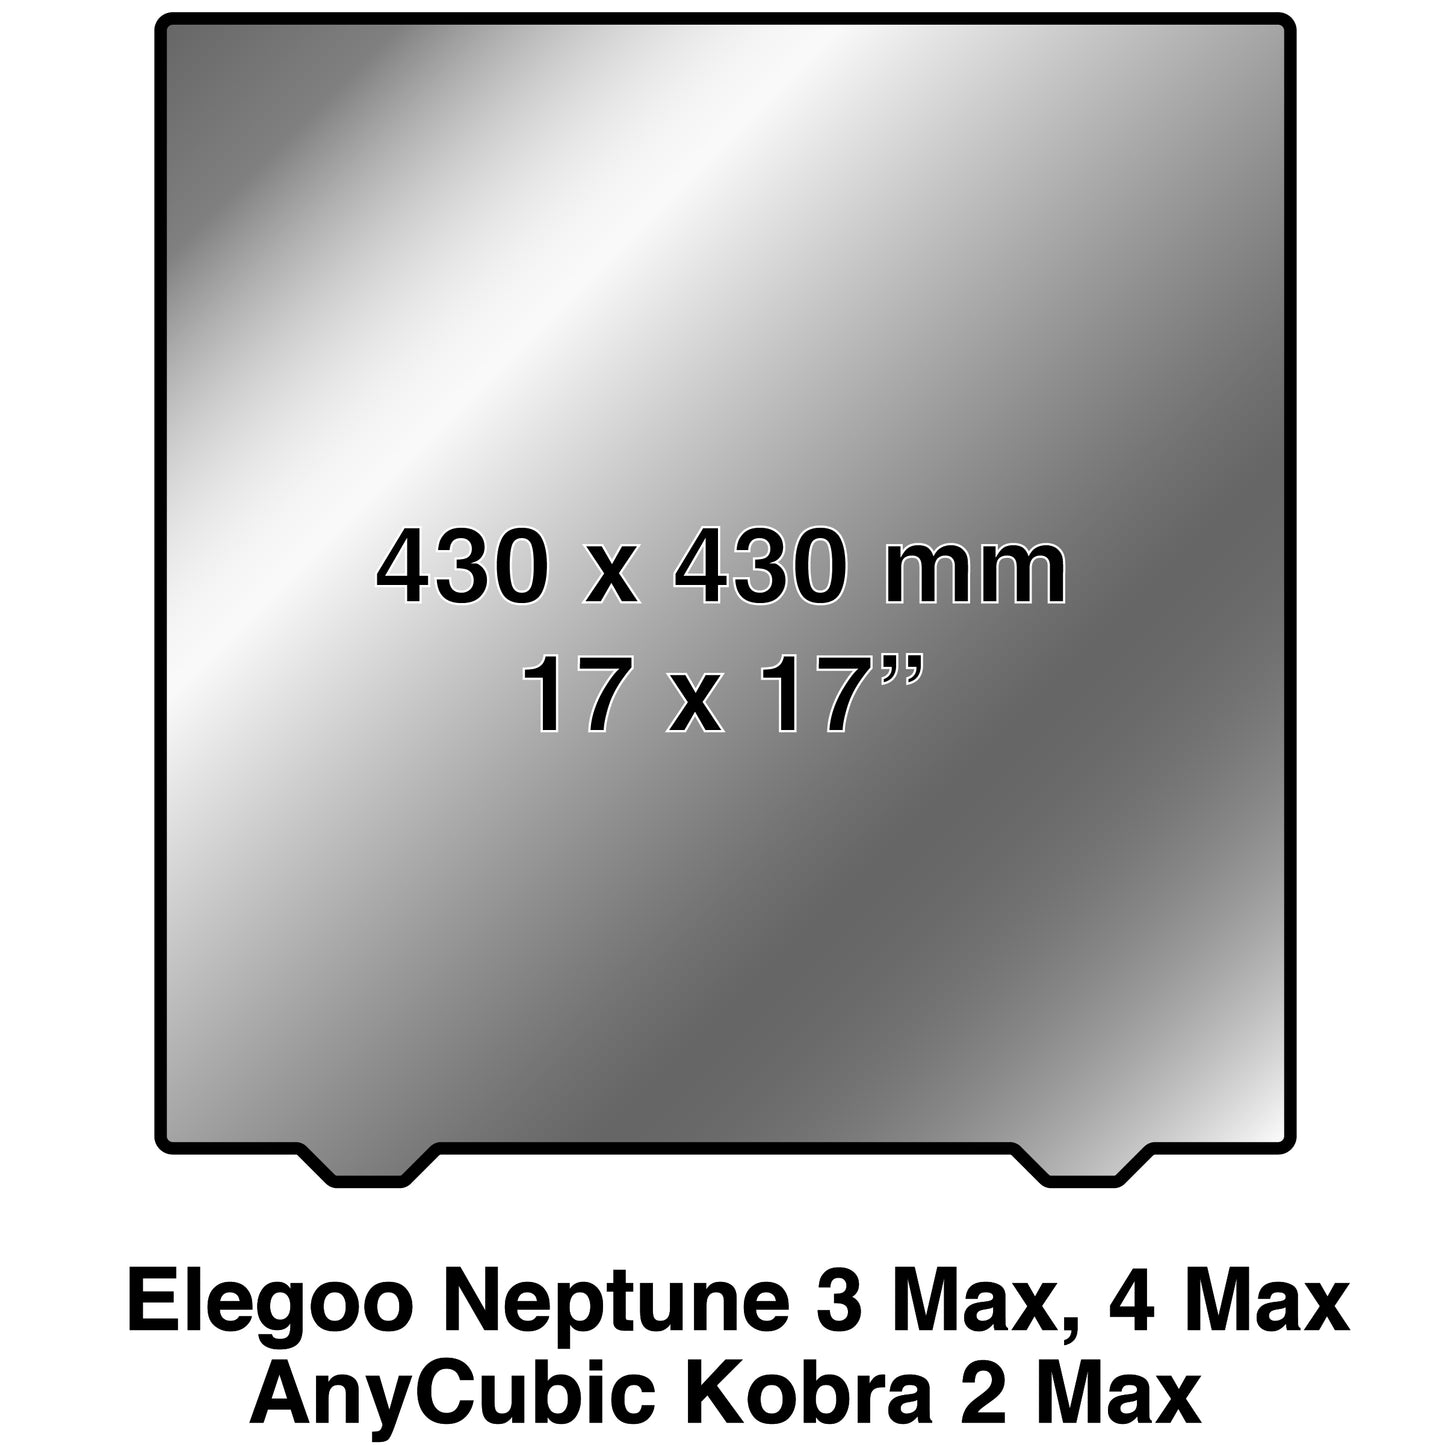 430 x 430 Kit with Pre-Installed PEX Build Surface - Elegoo Neptune 3 Max, Neptune 4 Max, and AnyCubic Kobra 2 Max